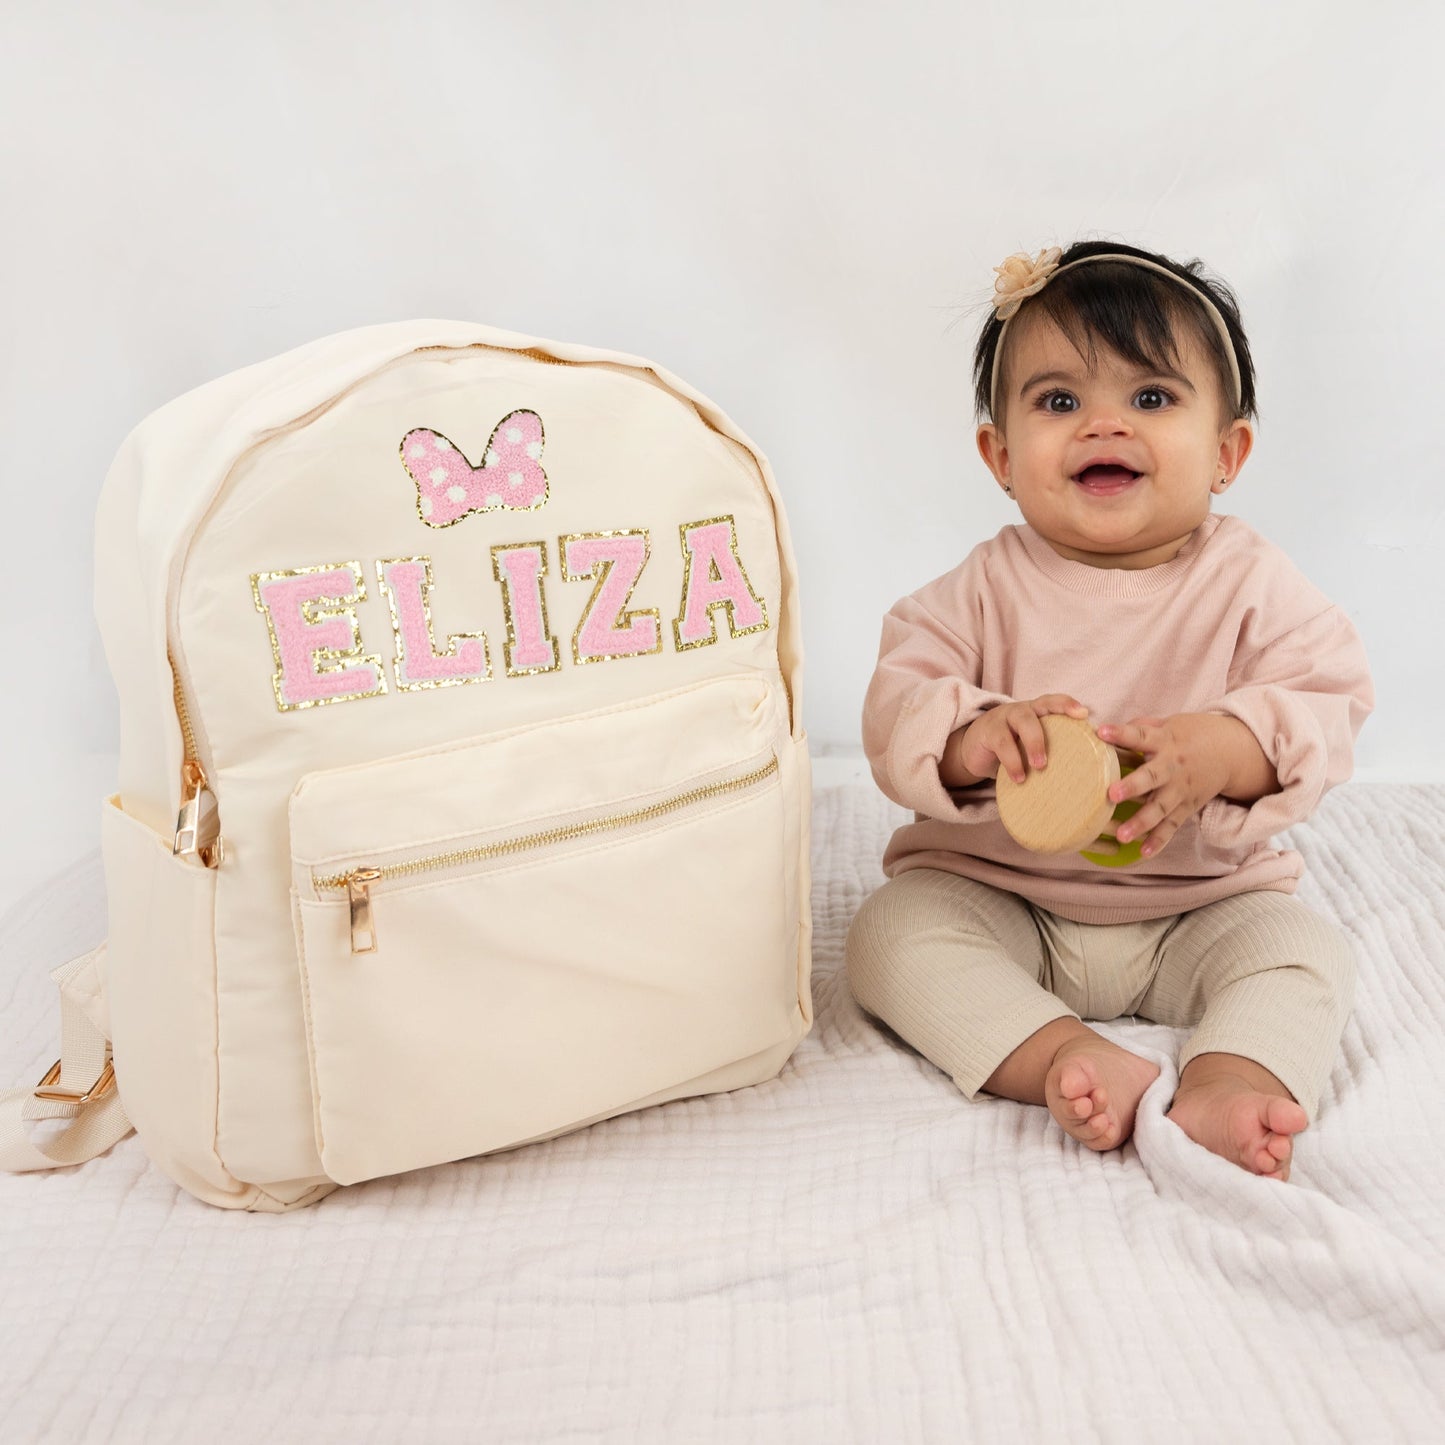 Personalized Patched Backpack for Kids